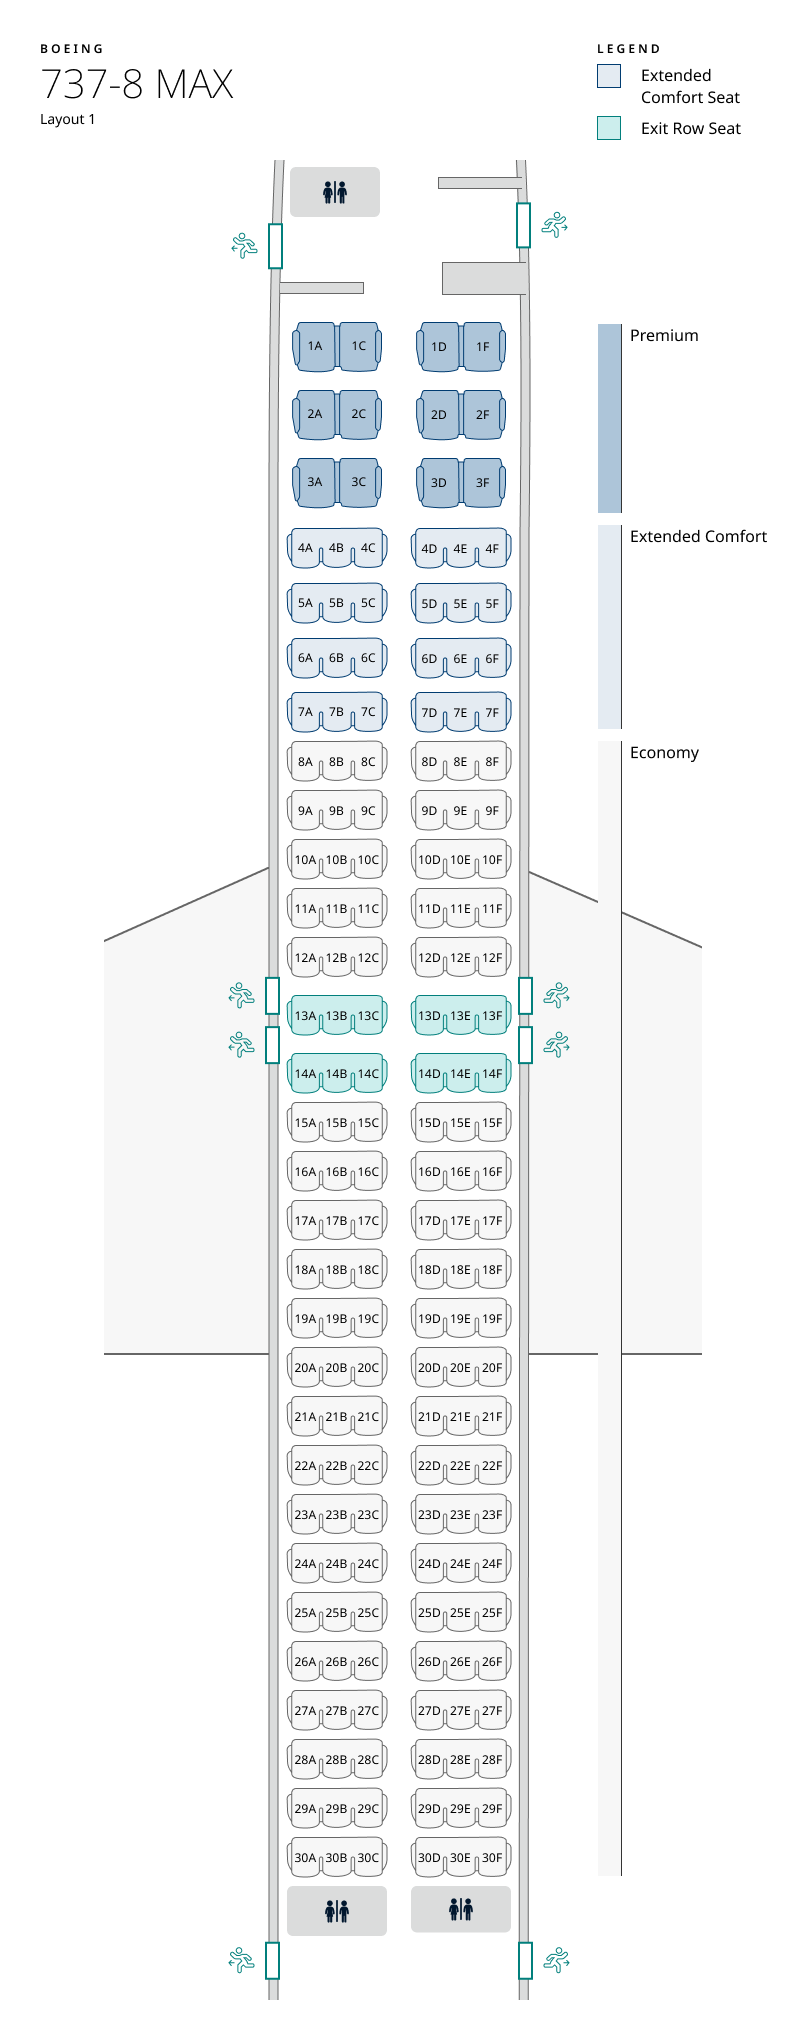 Seat map of 737-8 MAX layout 1. Seat information available in table below